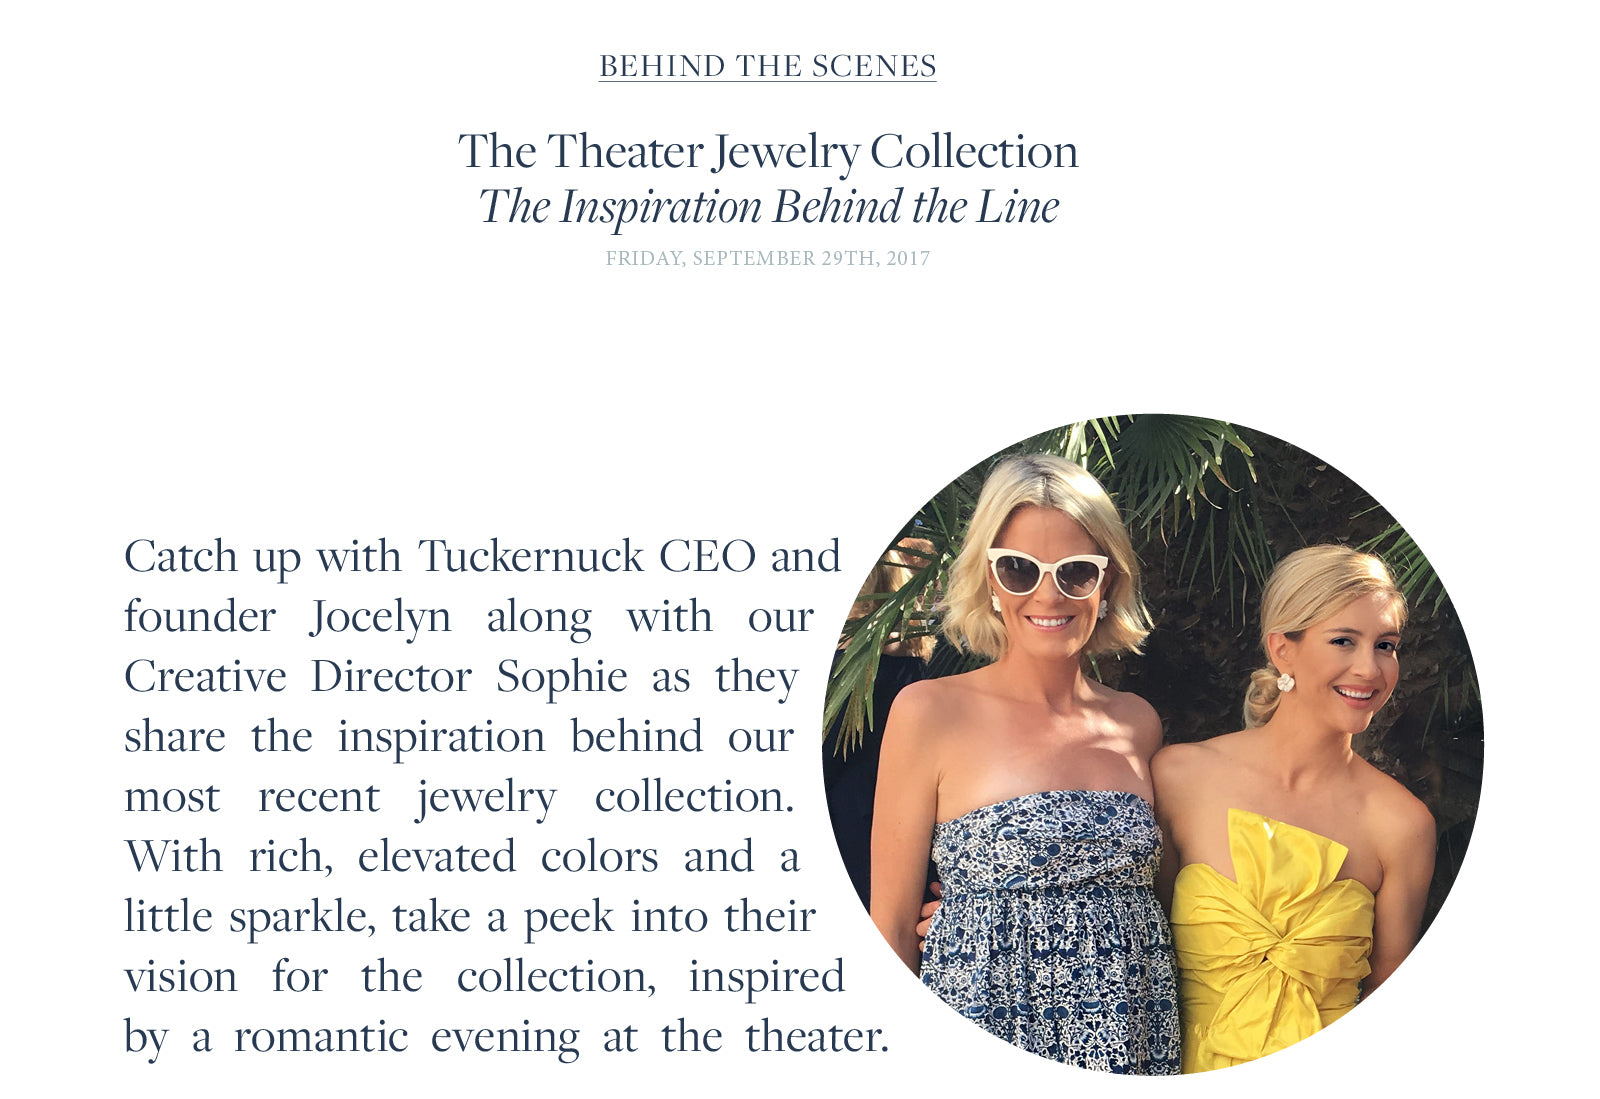 Catch up with Tuckernuck CEO and founder Jocelyn along with our Creative Director Sophie as they share the inspiration behind our most recent jewelry collection. With rich, elevated colors and a little sparkle, take a peek into their vision for the collection, inspired by a romantic evening at the theater. 